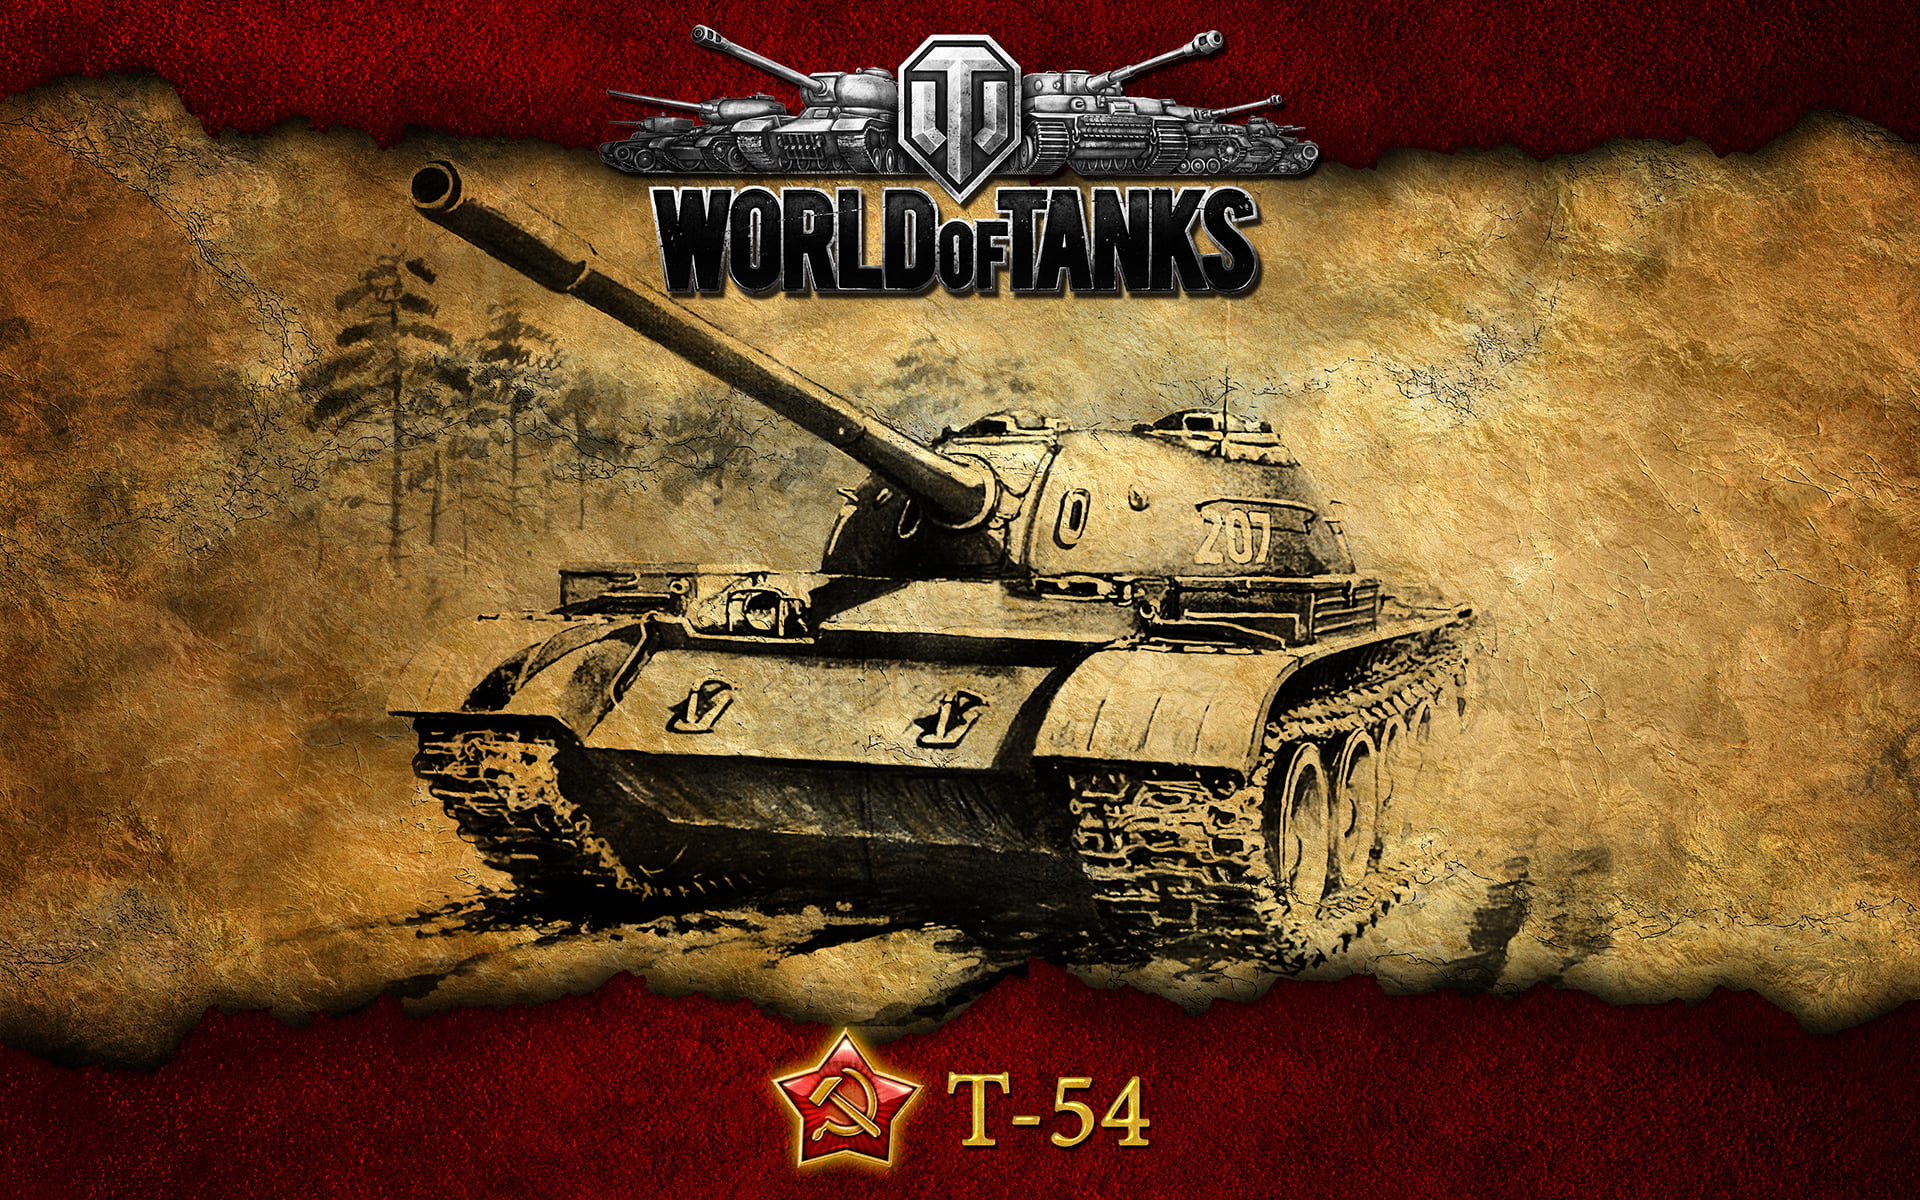 World of Tanks T-54 wallpaper, cockroach, USSR, WoT, weapon, army